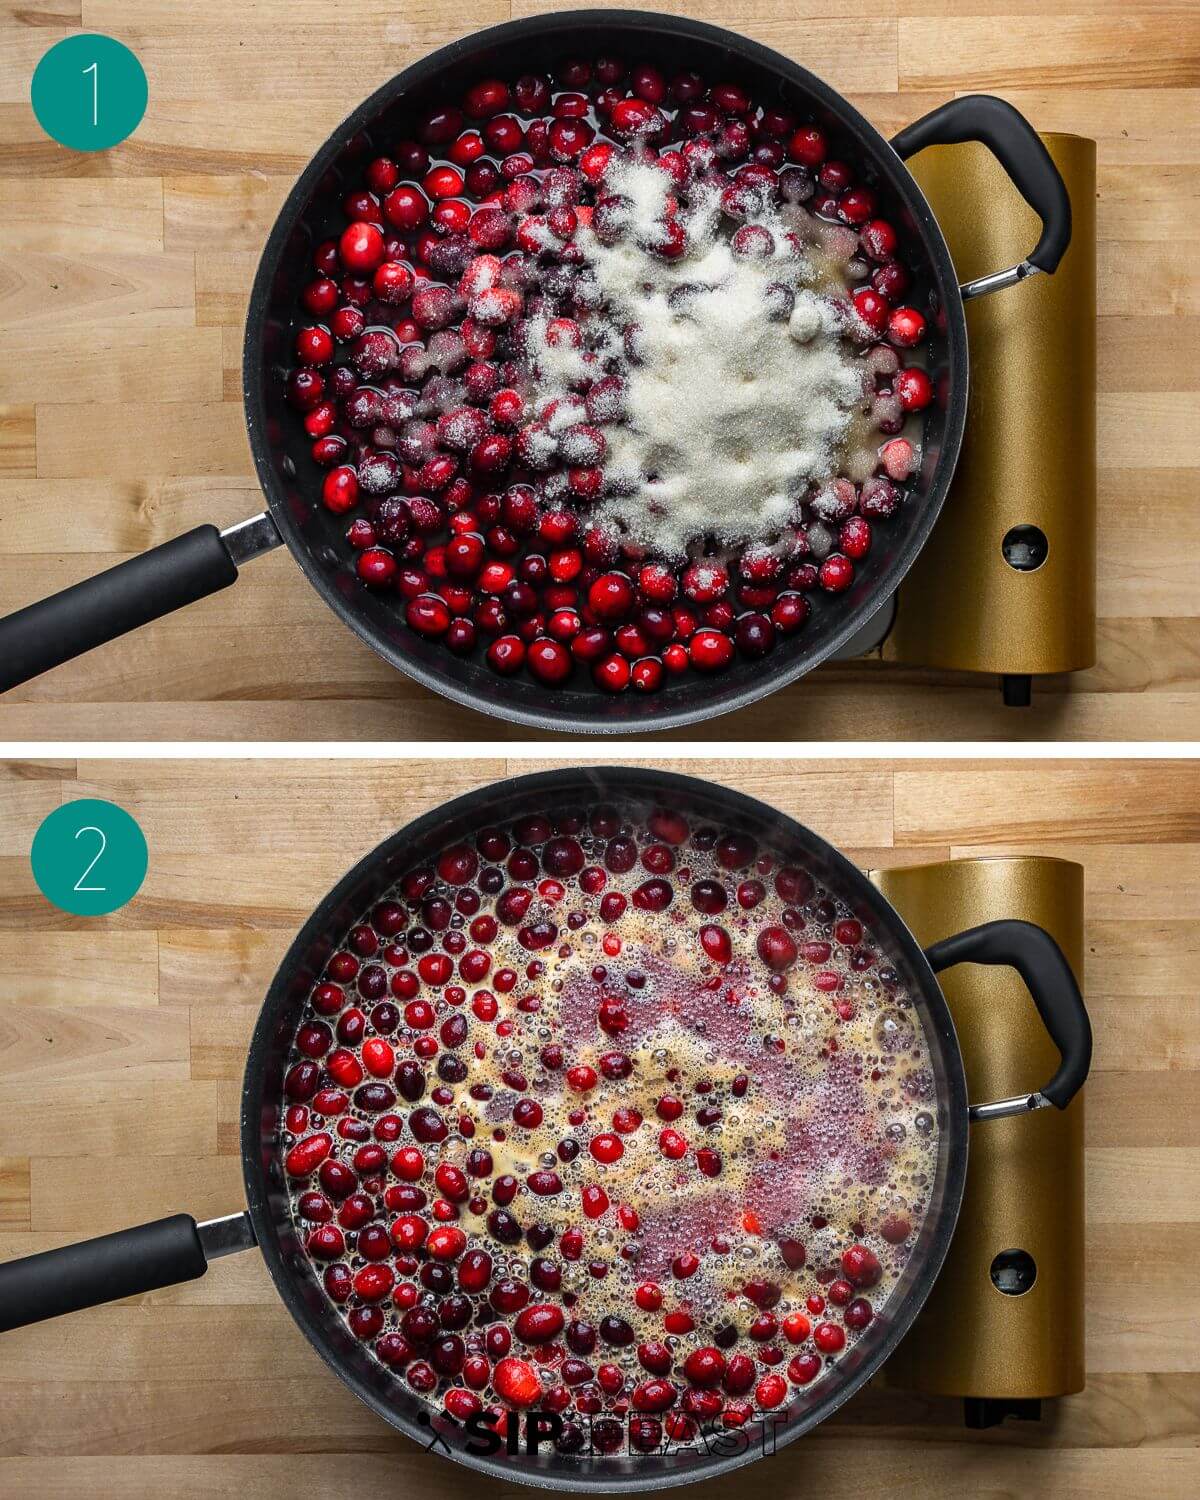 Cranberry sauce recipe process shot collage group number one showing a saucepan with cranberrys, sugar, and water simmering.